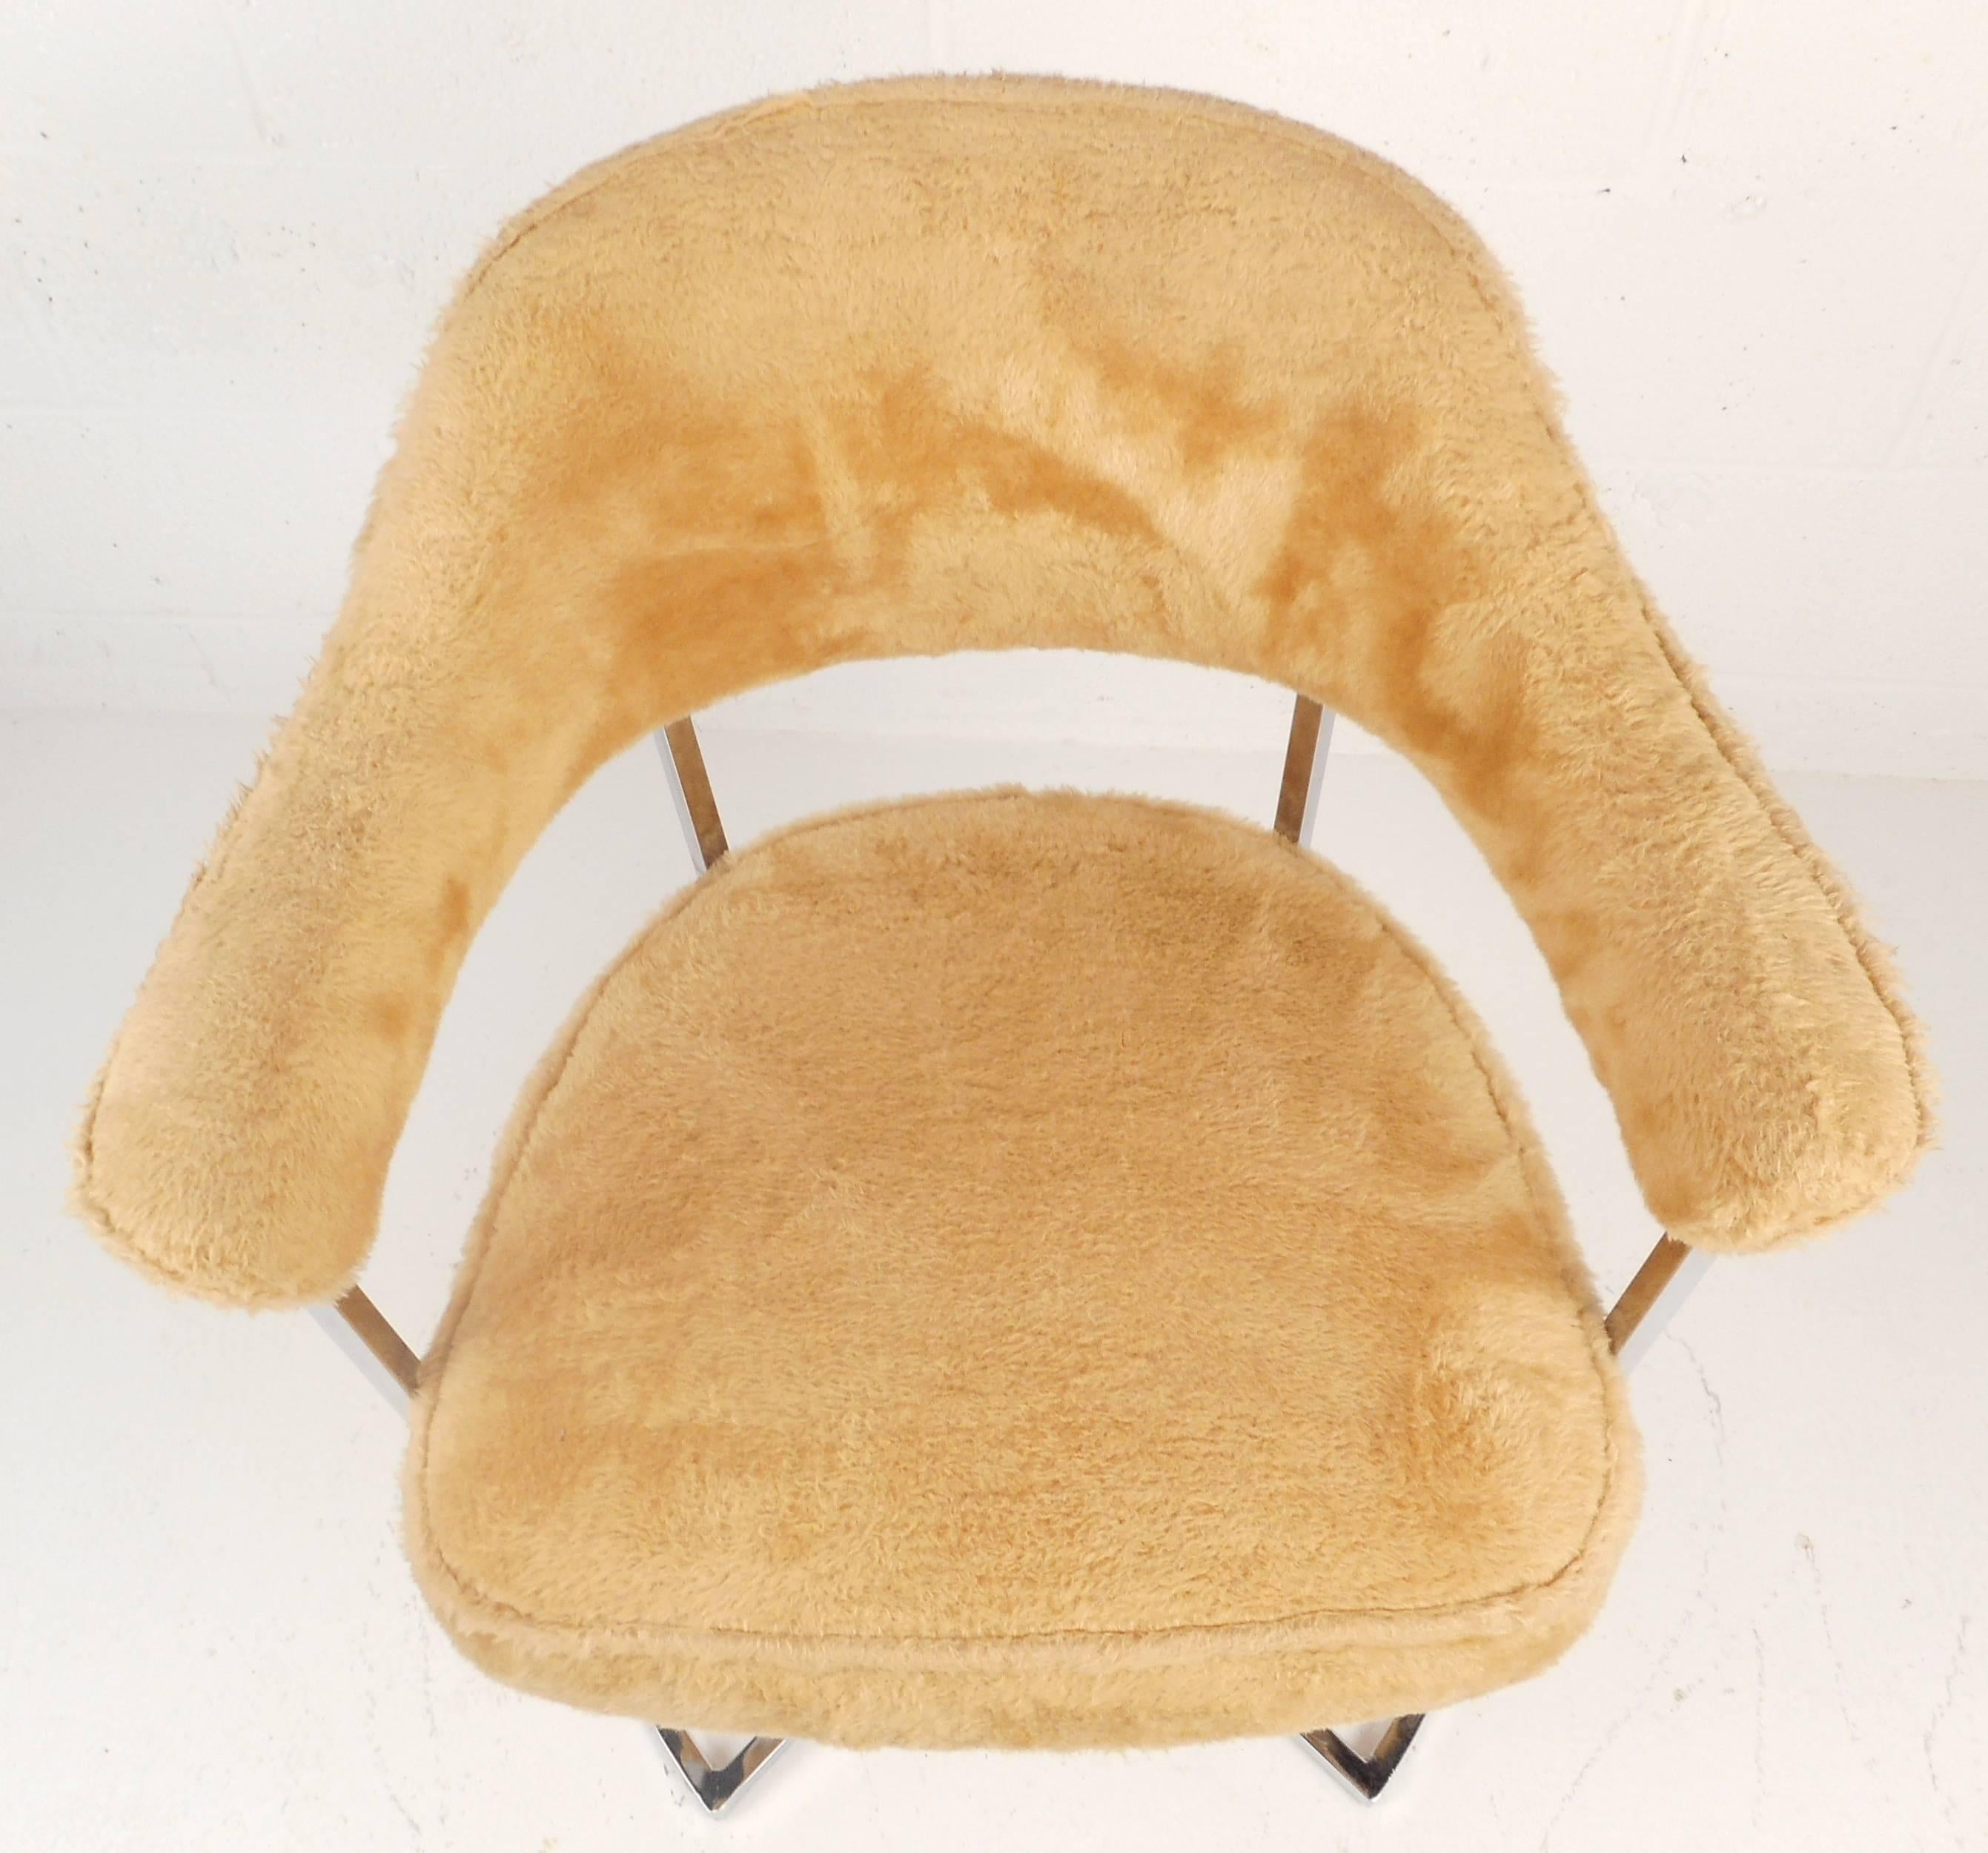 American Stylish Mid-Century Modern Swivel Tulip Chairs by Cal-Style Furniture